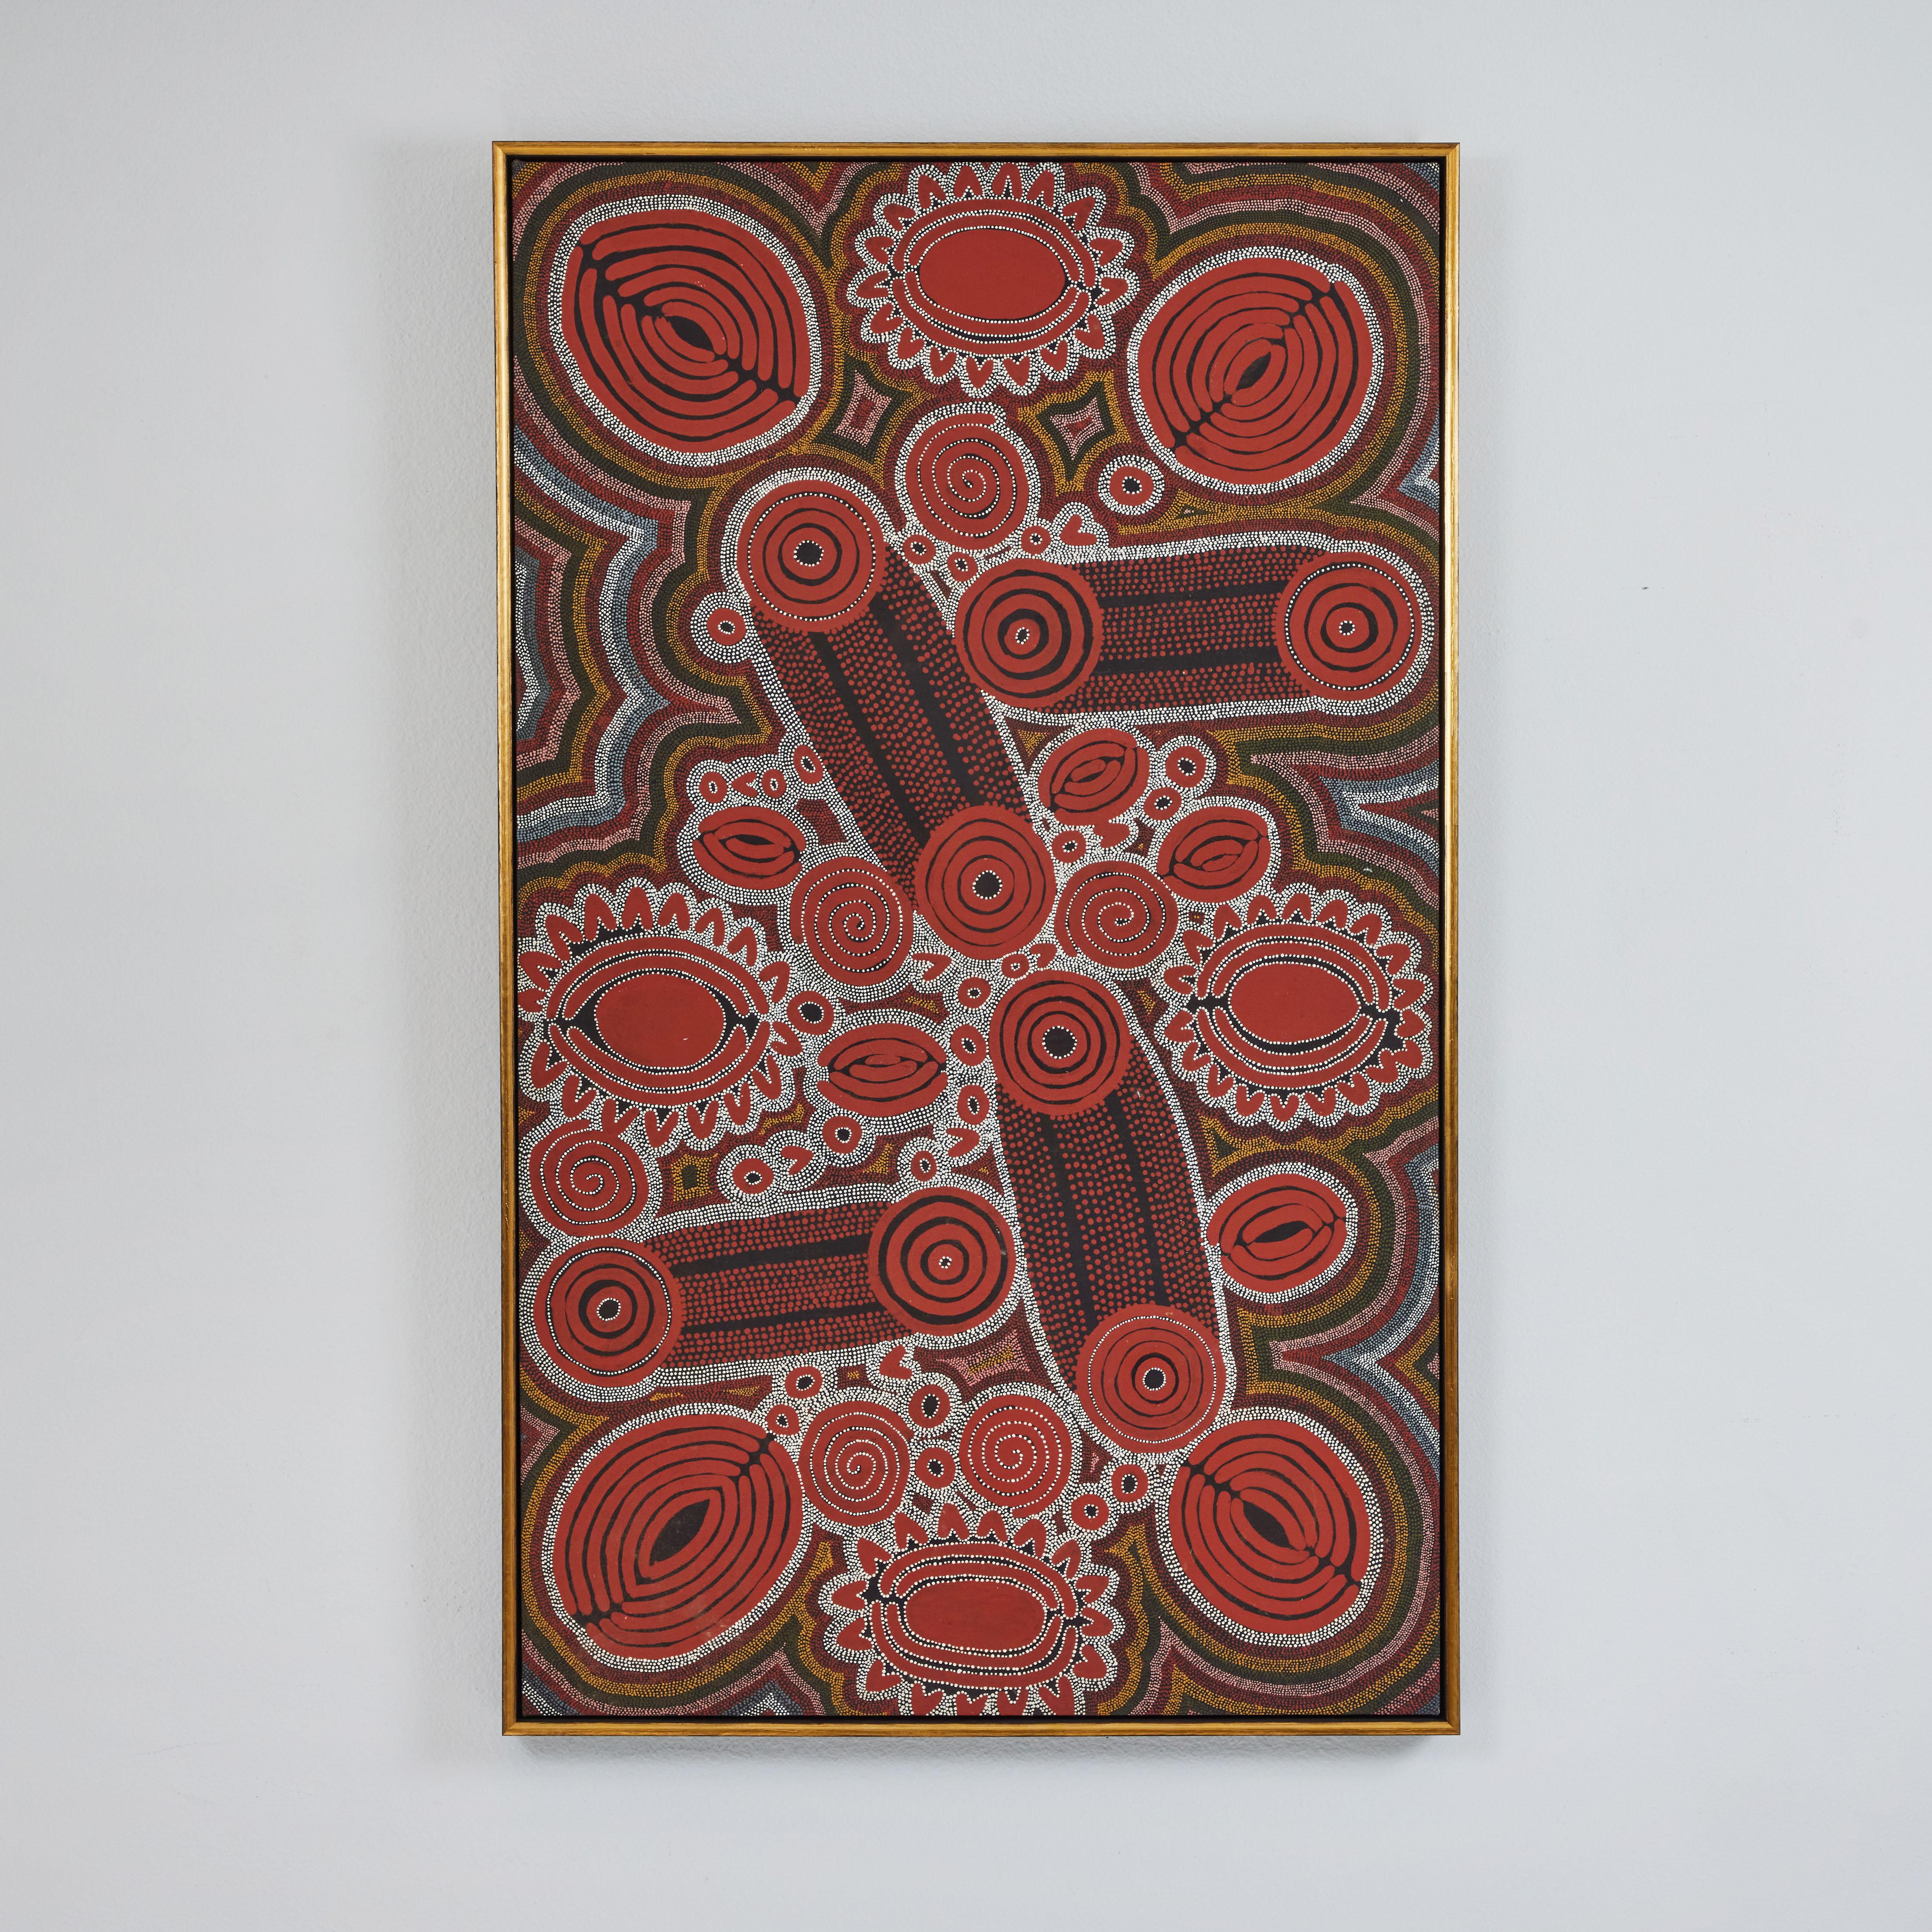 This is a beautiful Aboriginal Jukurrpa (dreaming story) by Dorrie Petyarre,  an artist for the Mbantu Gallery, entitled 